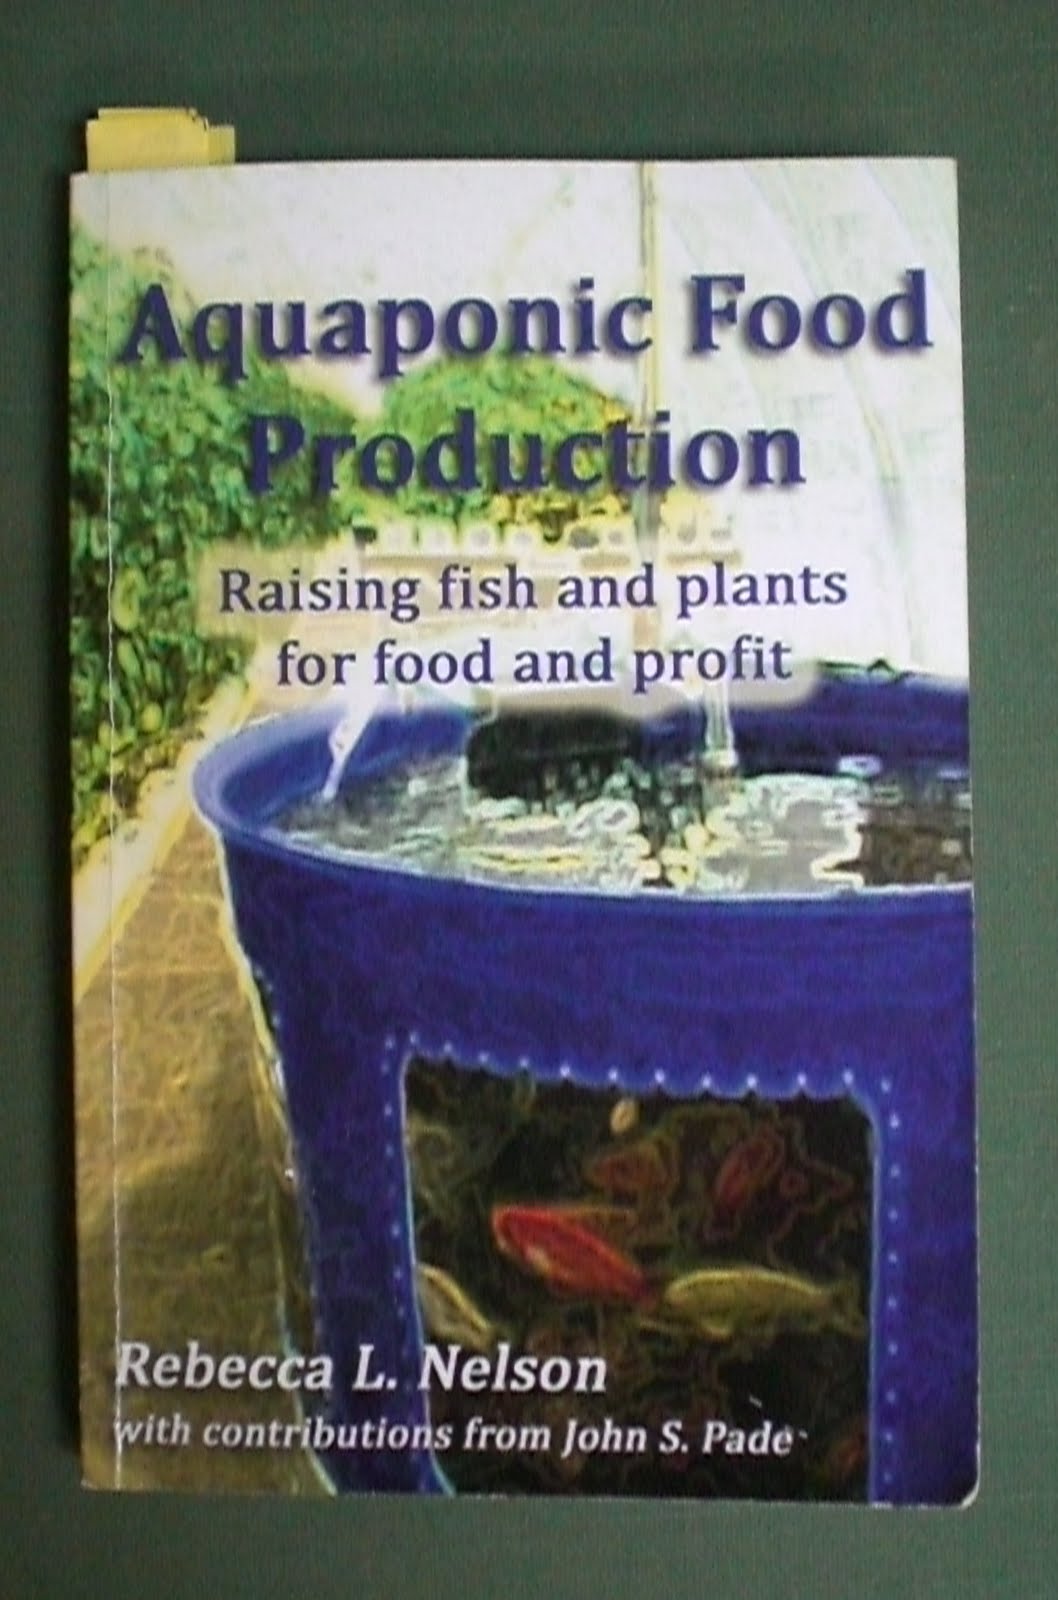 Aquaponic Fish System with Food